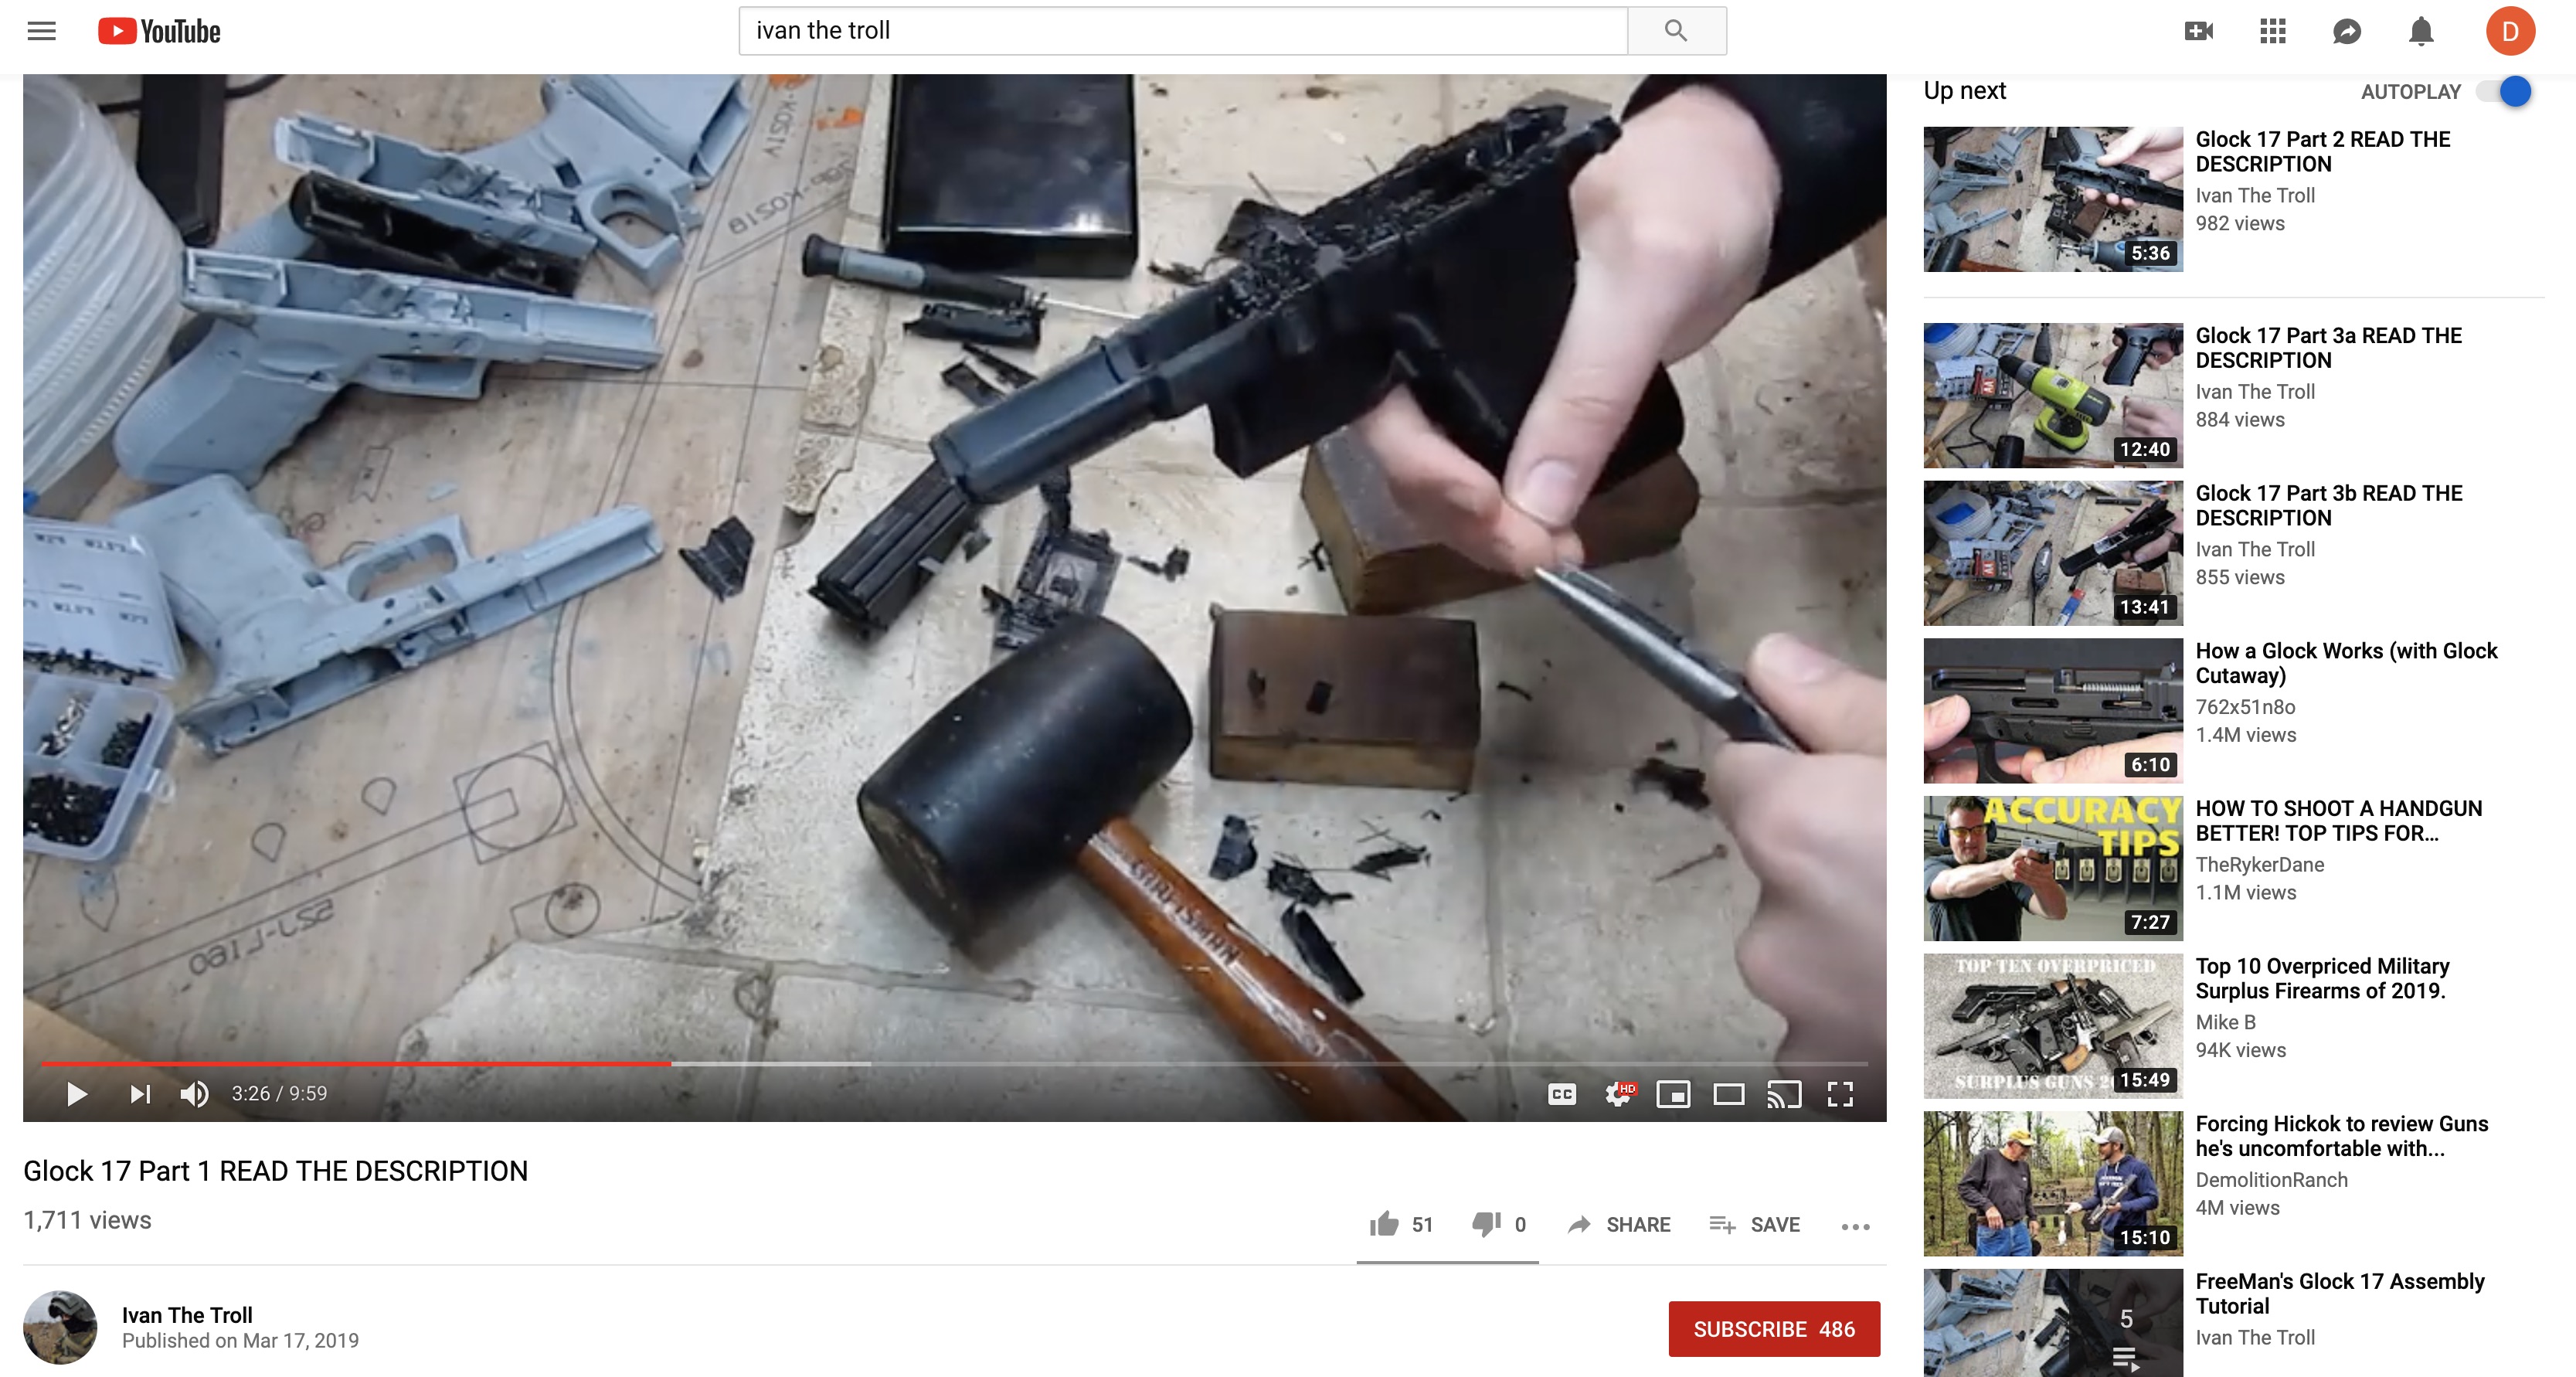 Delightful: Plans for 3D-Printed Guns Are Still Accessible on Twitter and YouTube Ivan-the-troll-1